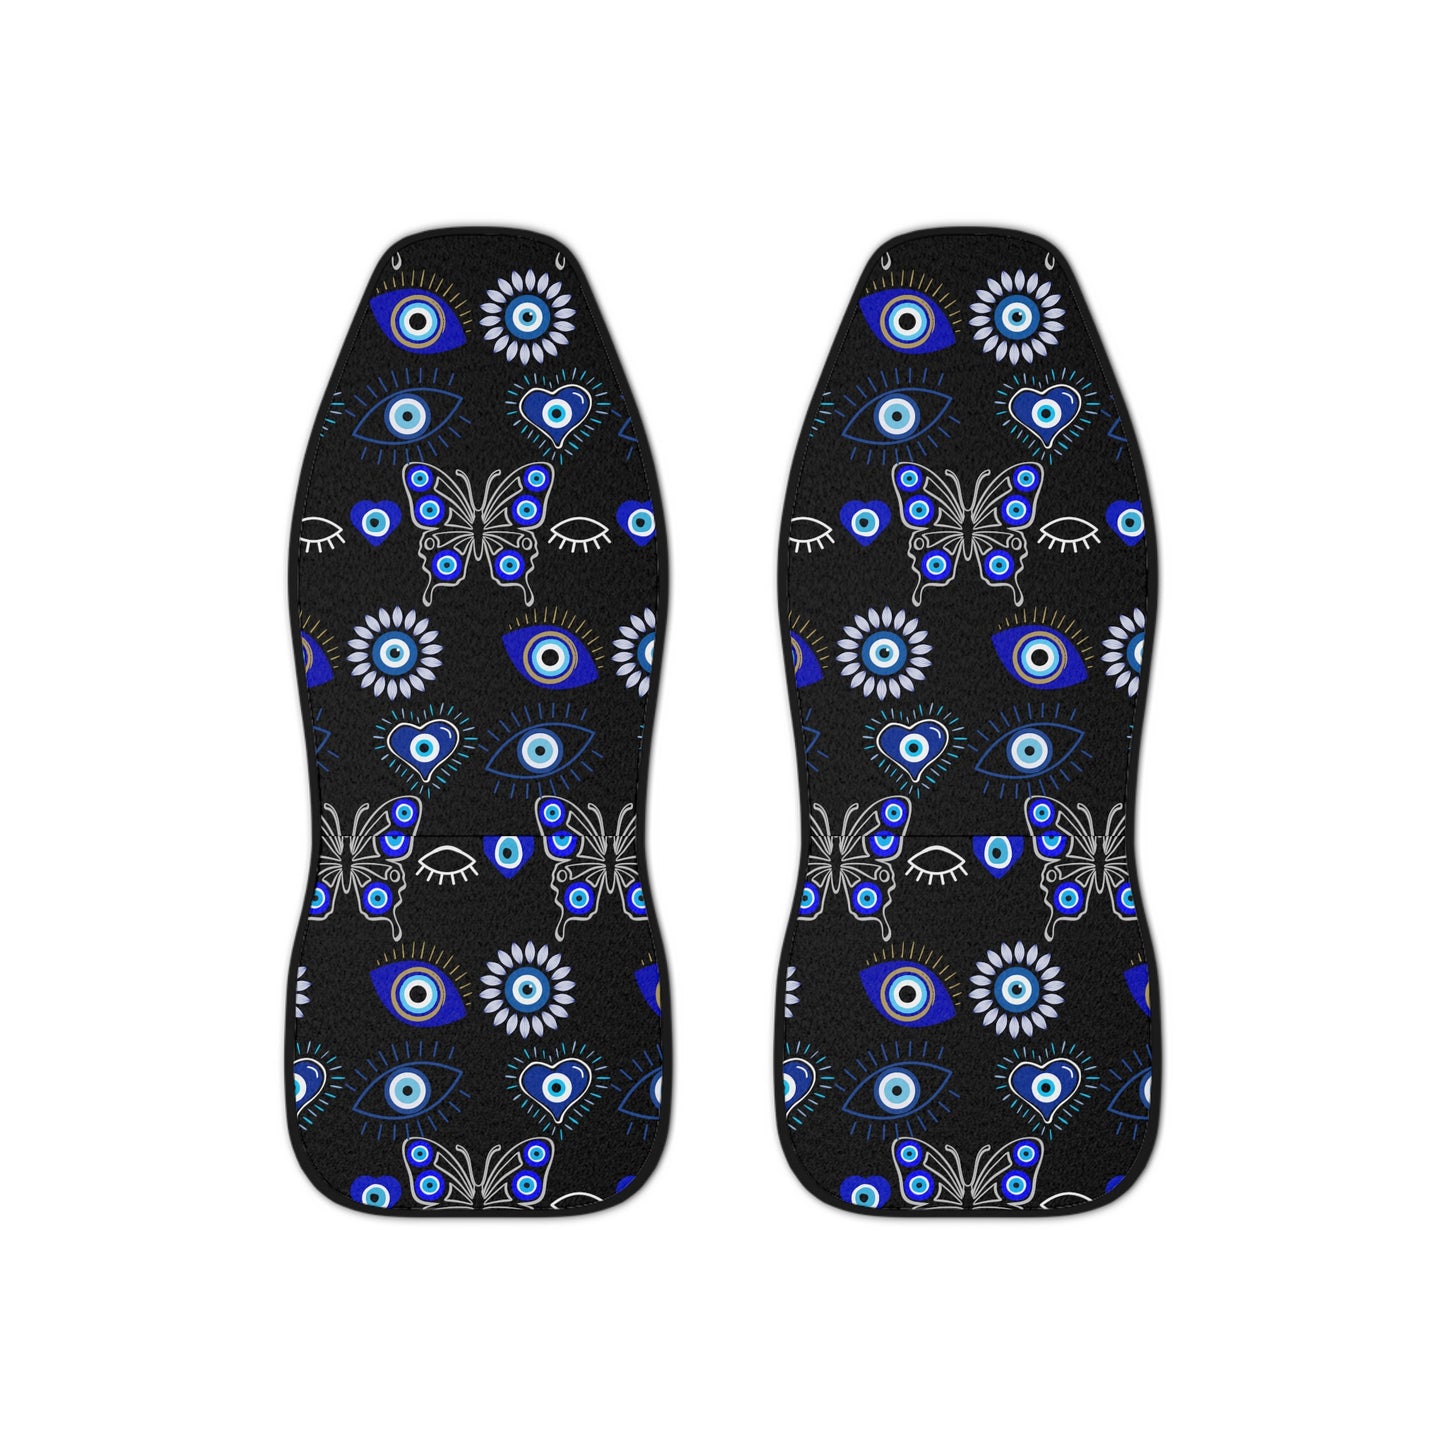 Blue & White All Seeing Evil Eye Butterfly Black Car Seat Covers